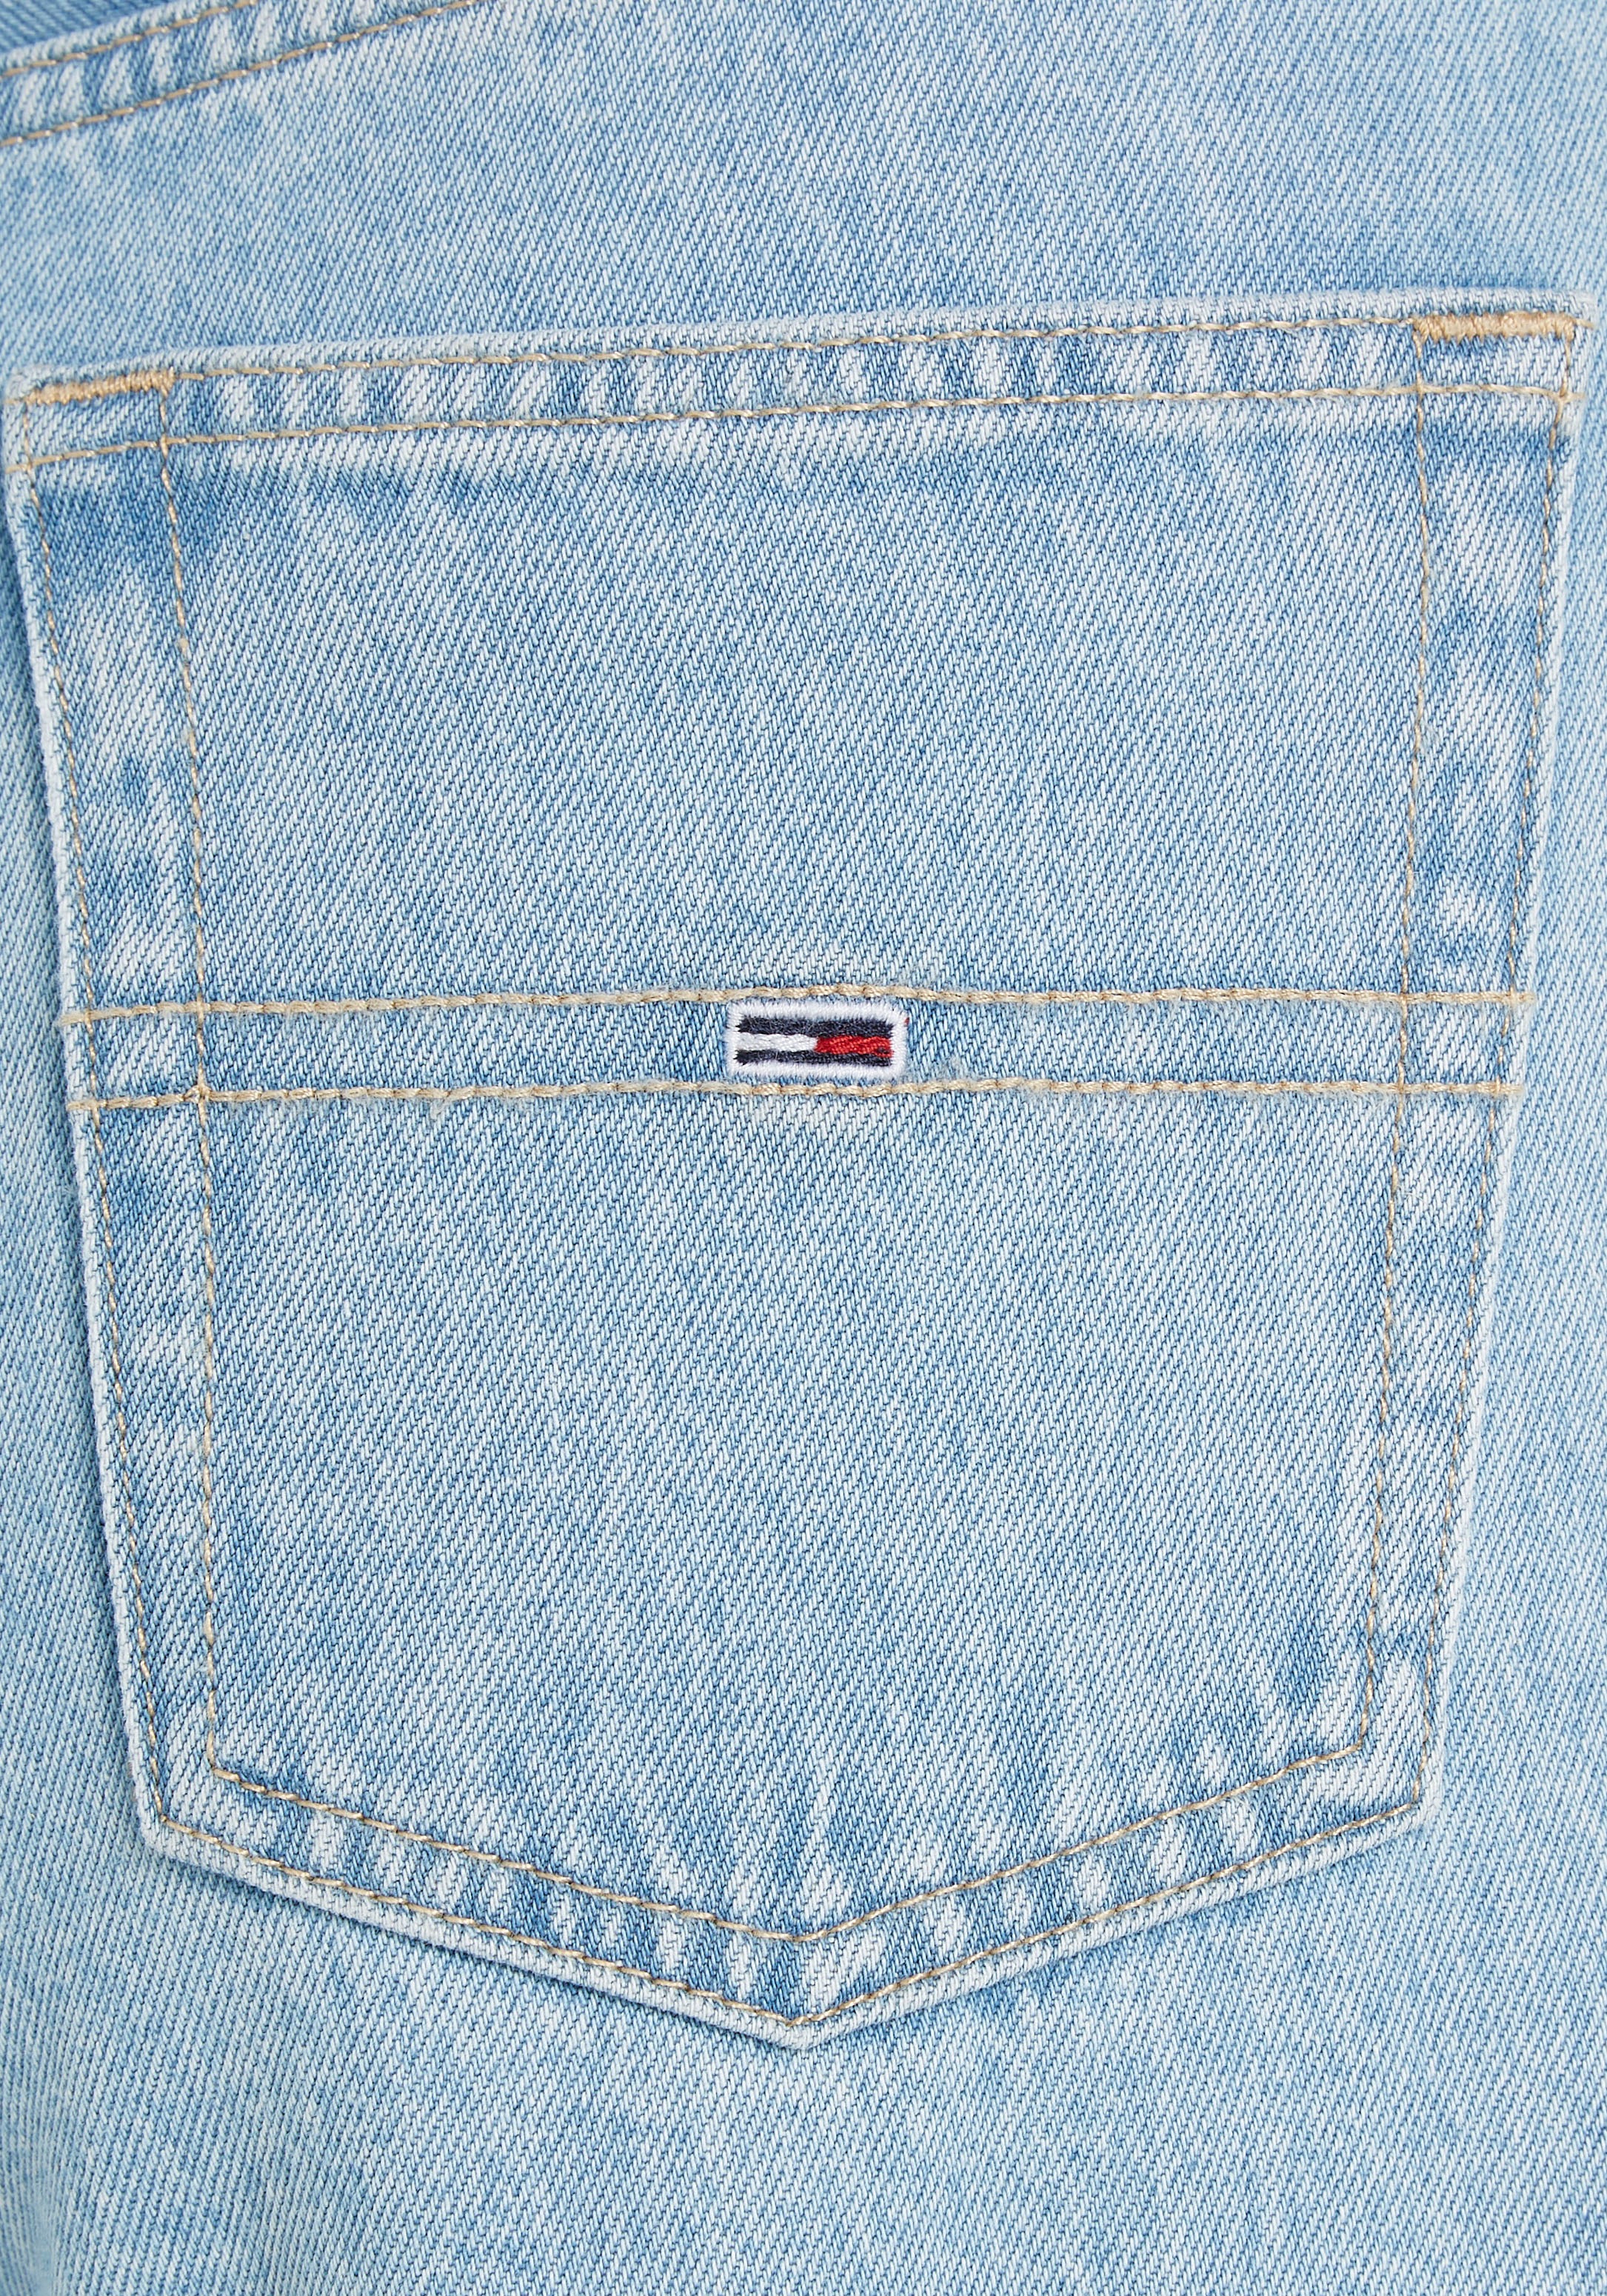 Tommy Jeans Weite Jeans, mit Tommy Jeans Logobadges online bei OTTO